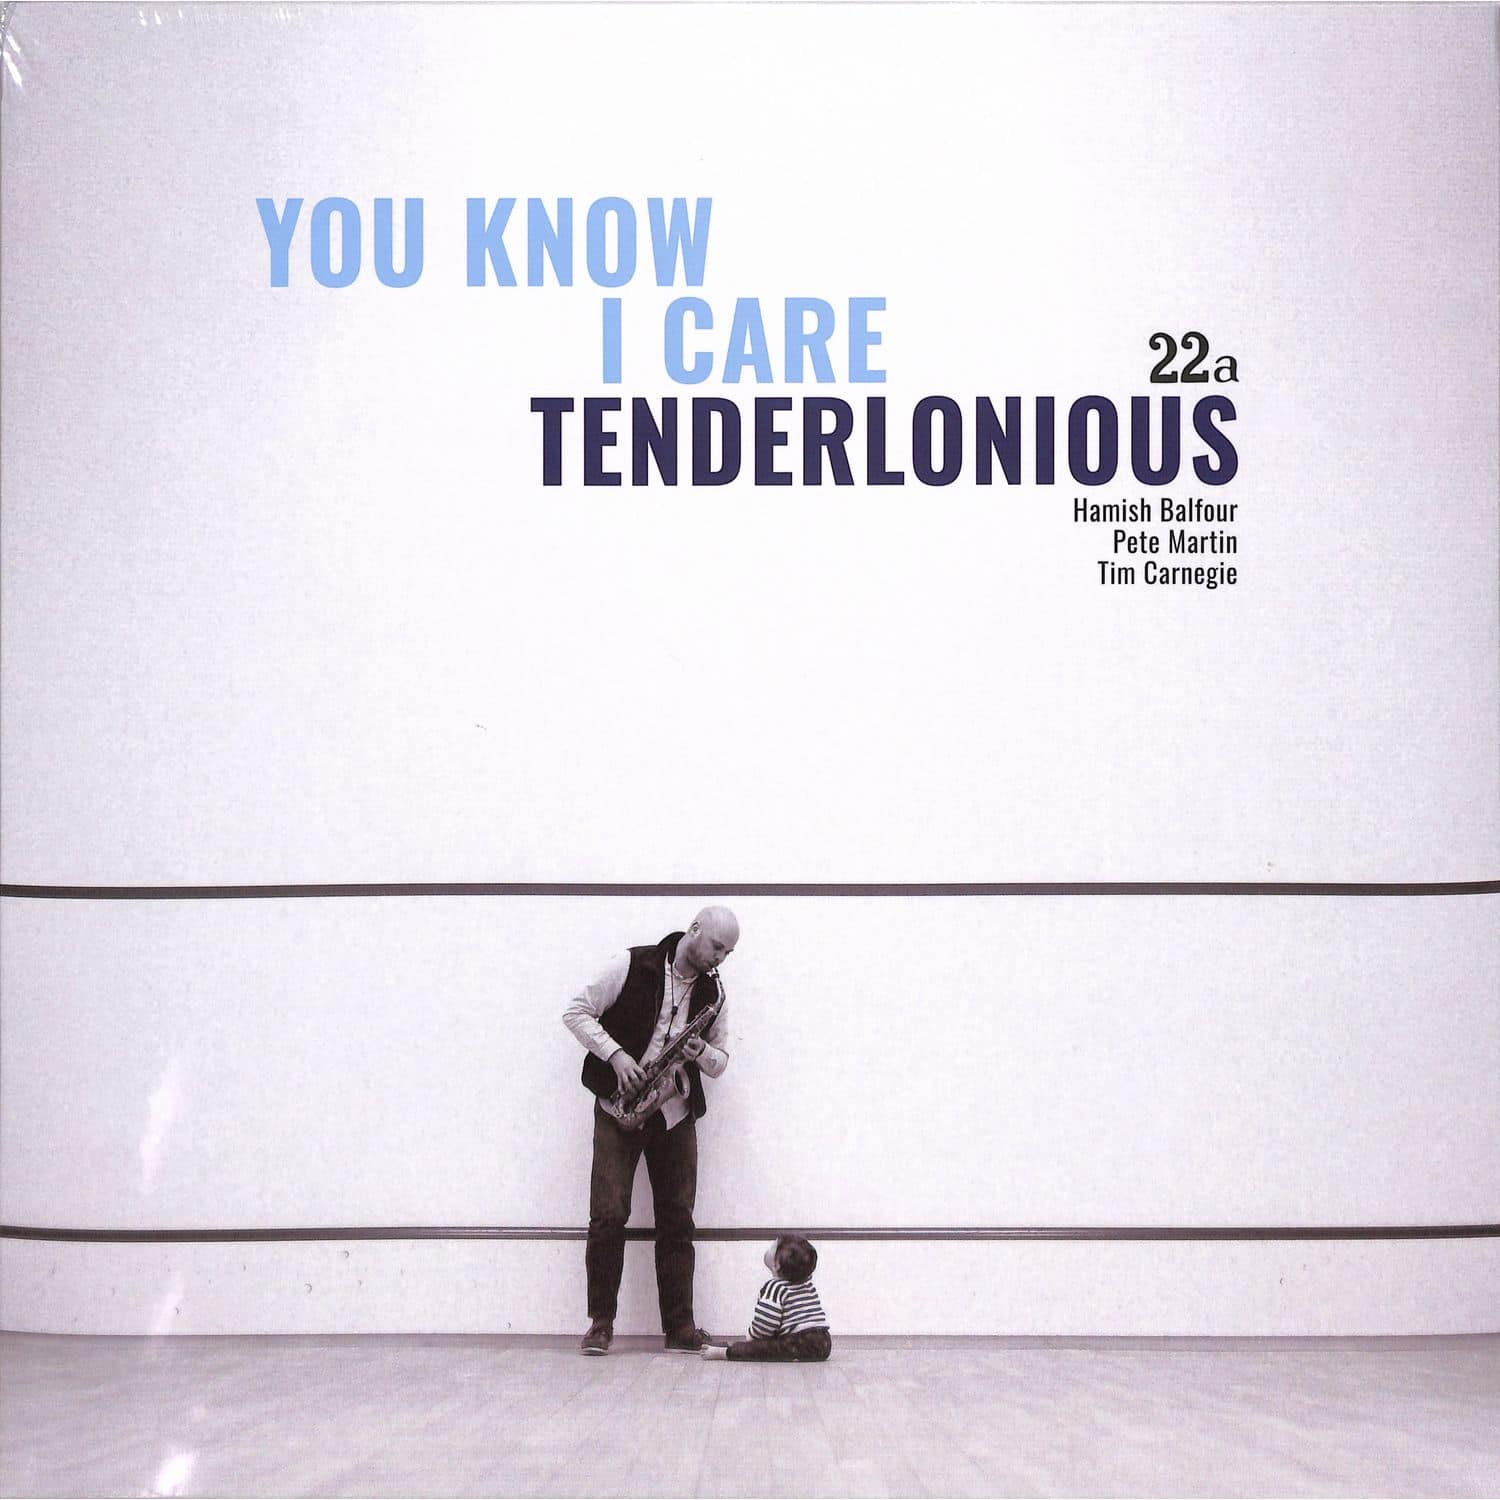 Tenderlonious - YOU KNOW I CARE 